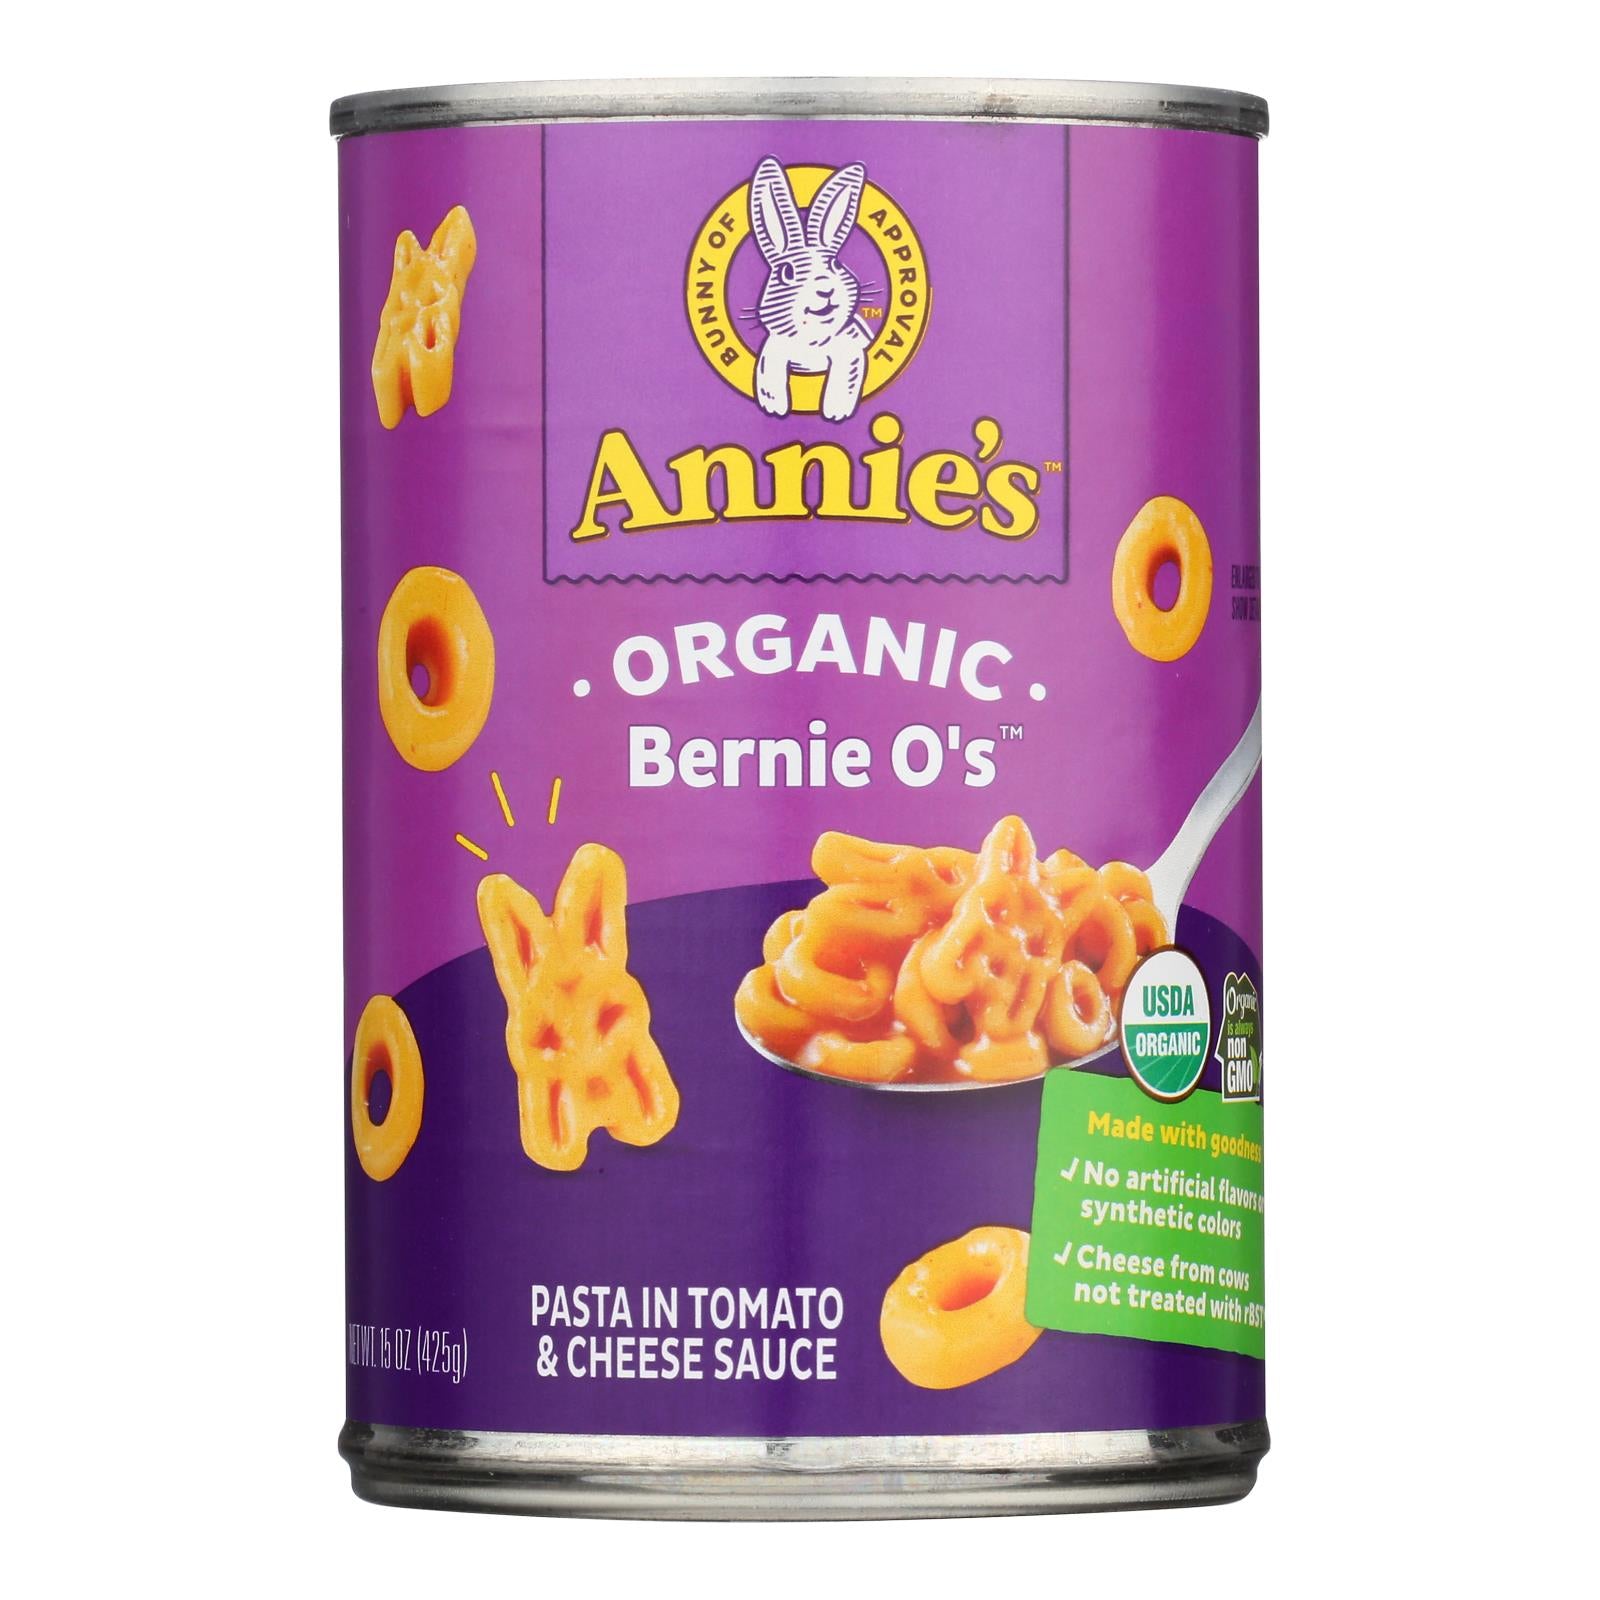 Annie's Homegrown Organic Bernie O?s Pasta In Tomato And Cheese Sauce - Case Of 12 - 15 Oz.